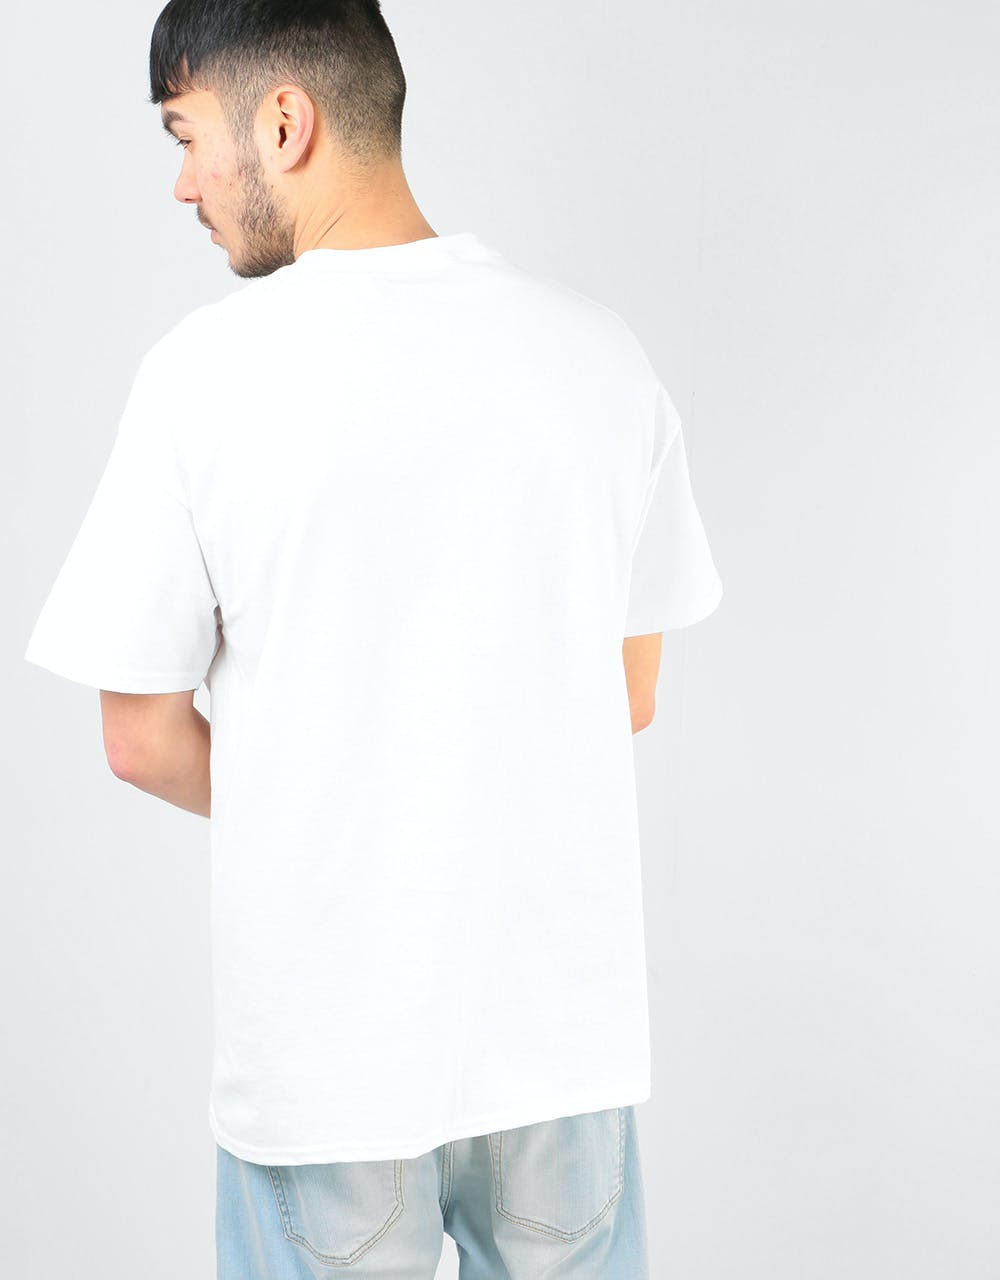 Route One Ultimate Riding Machine T-Shirt  - White